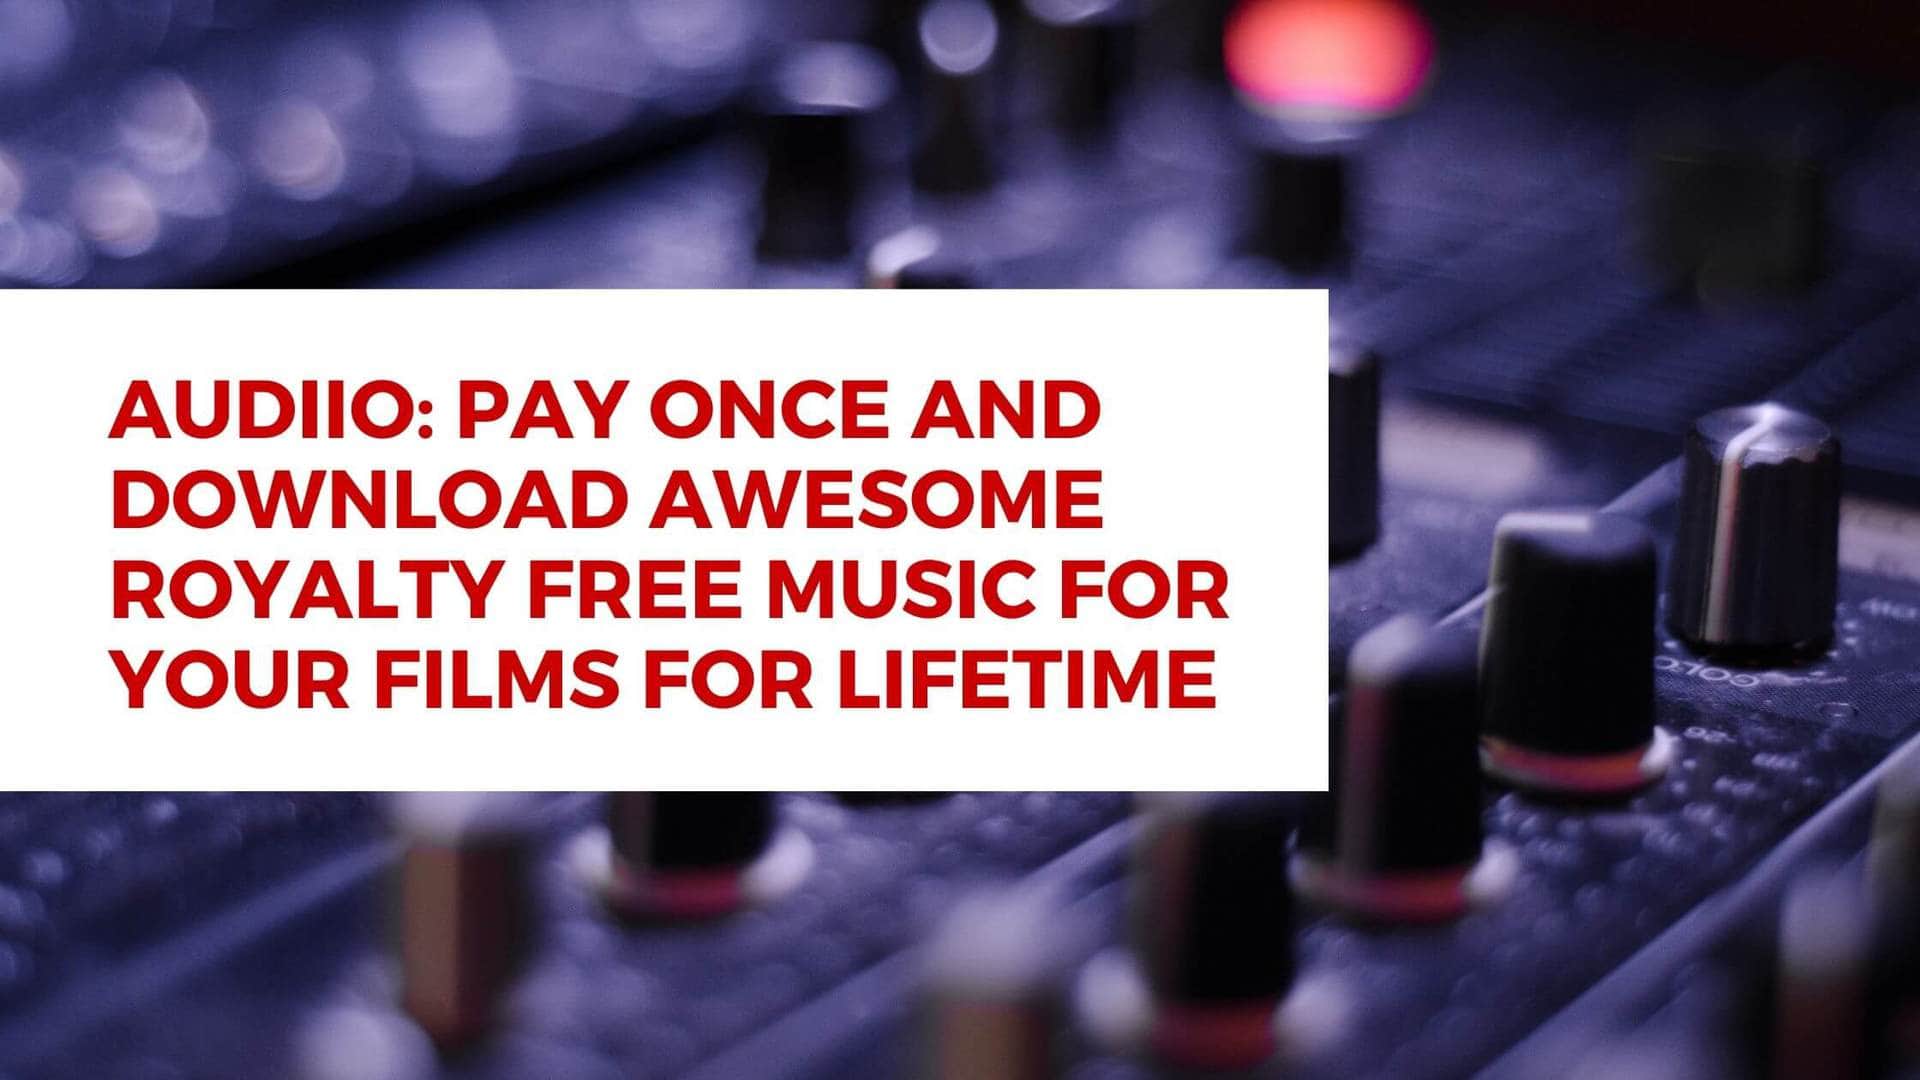 Audiio - Pay Once And Download Awesome Royalty Free Music For Your Films For Lifetime - Indie Shorts Mag